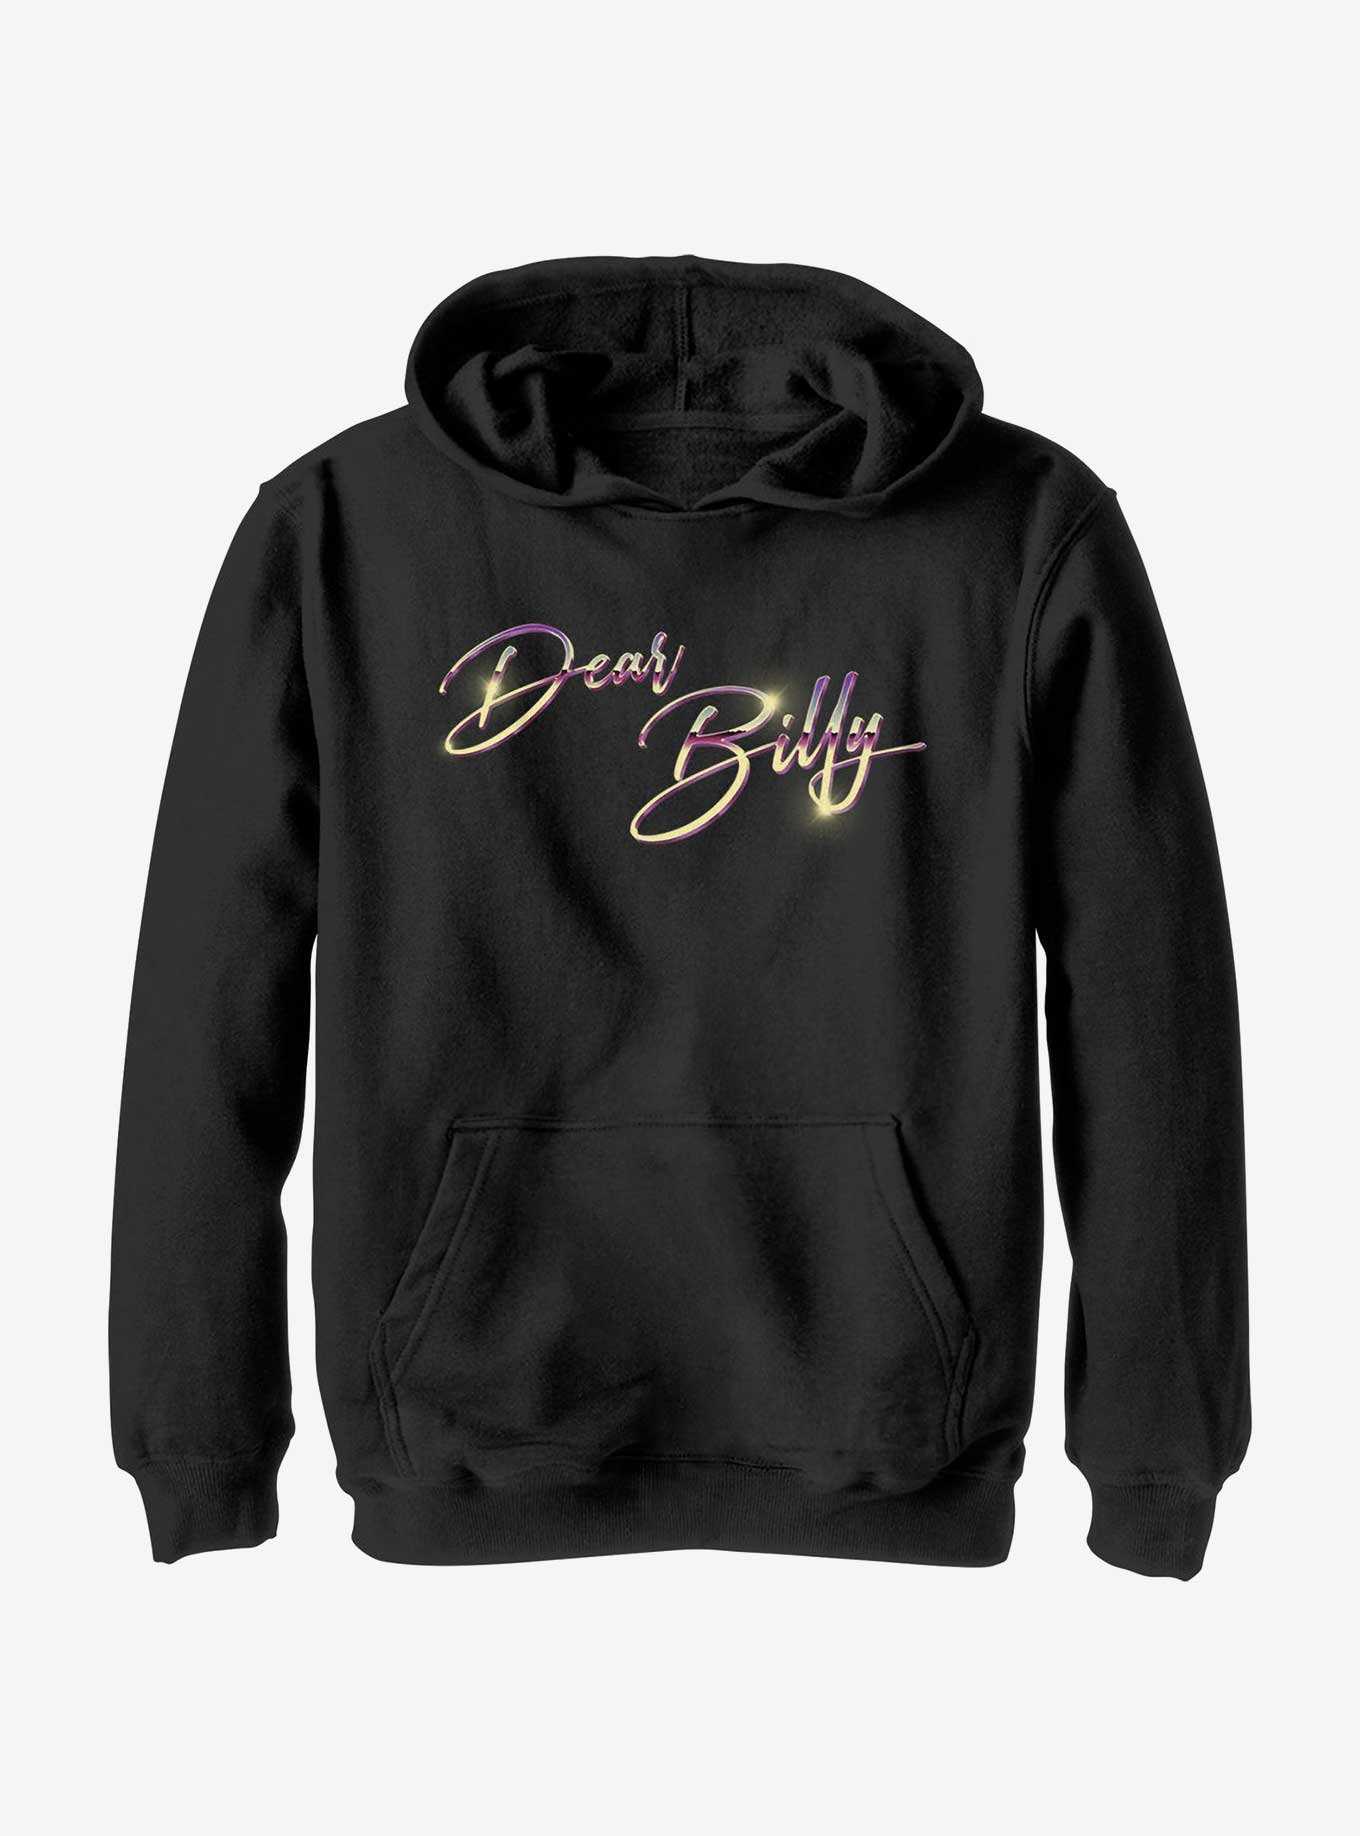 Stranger Things Dear Billy Youth Hoodie, , hi-res